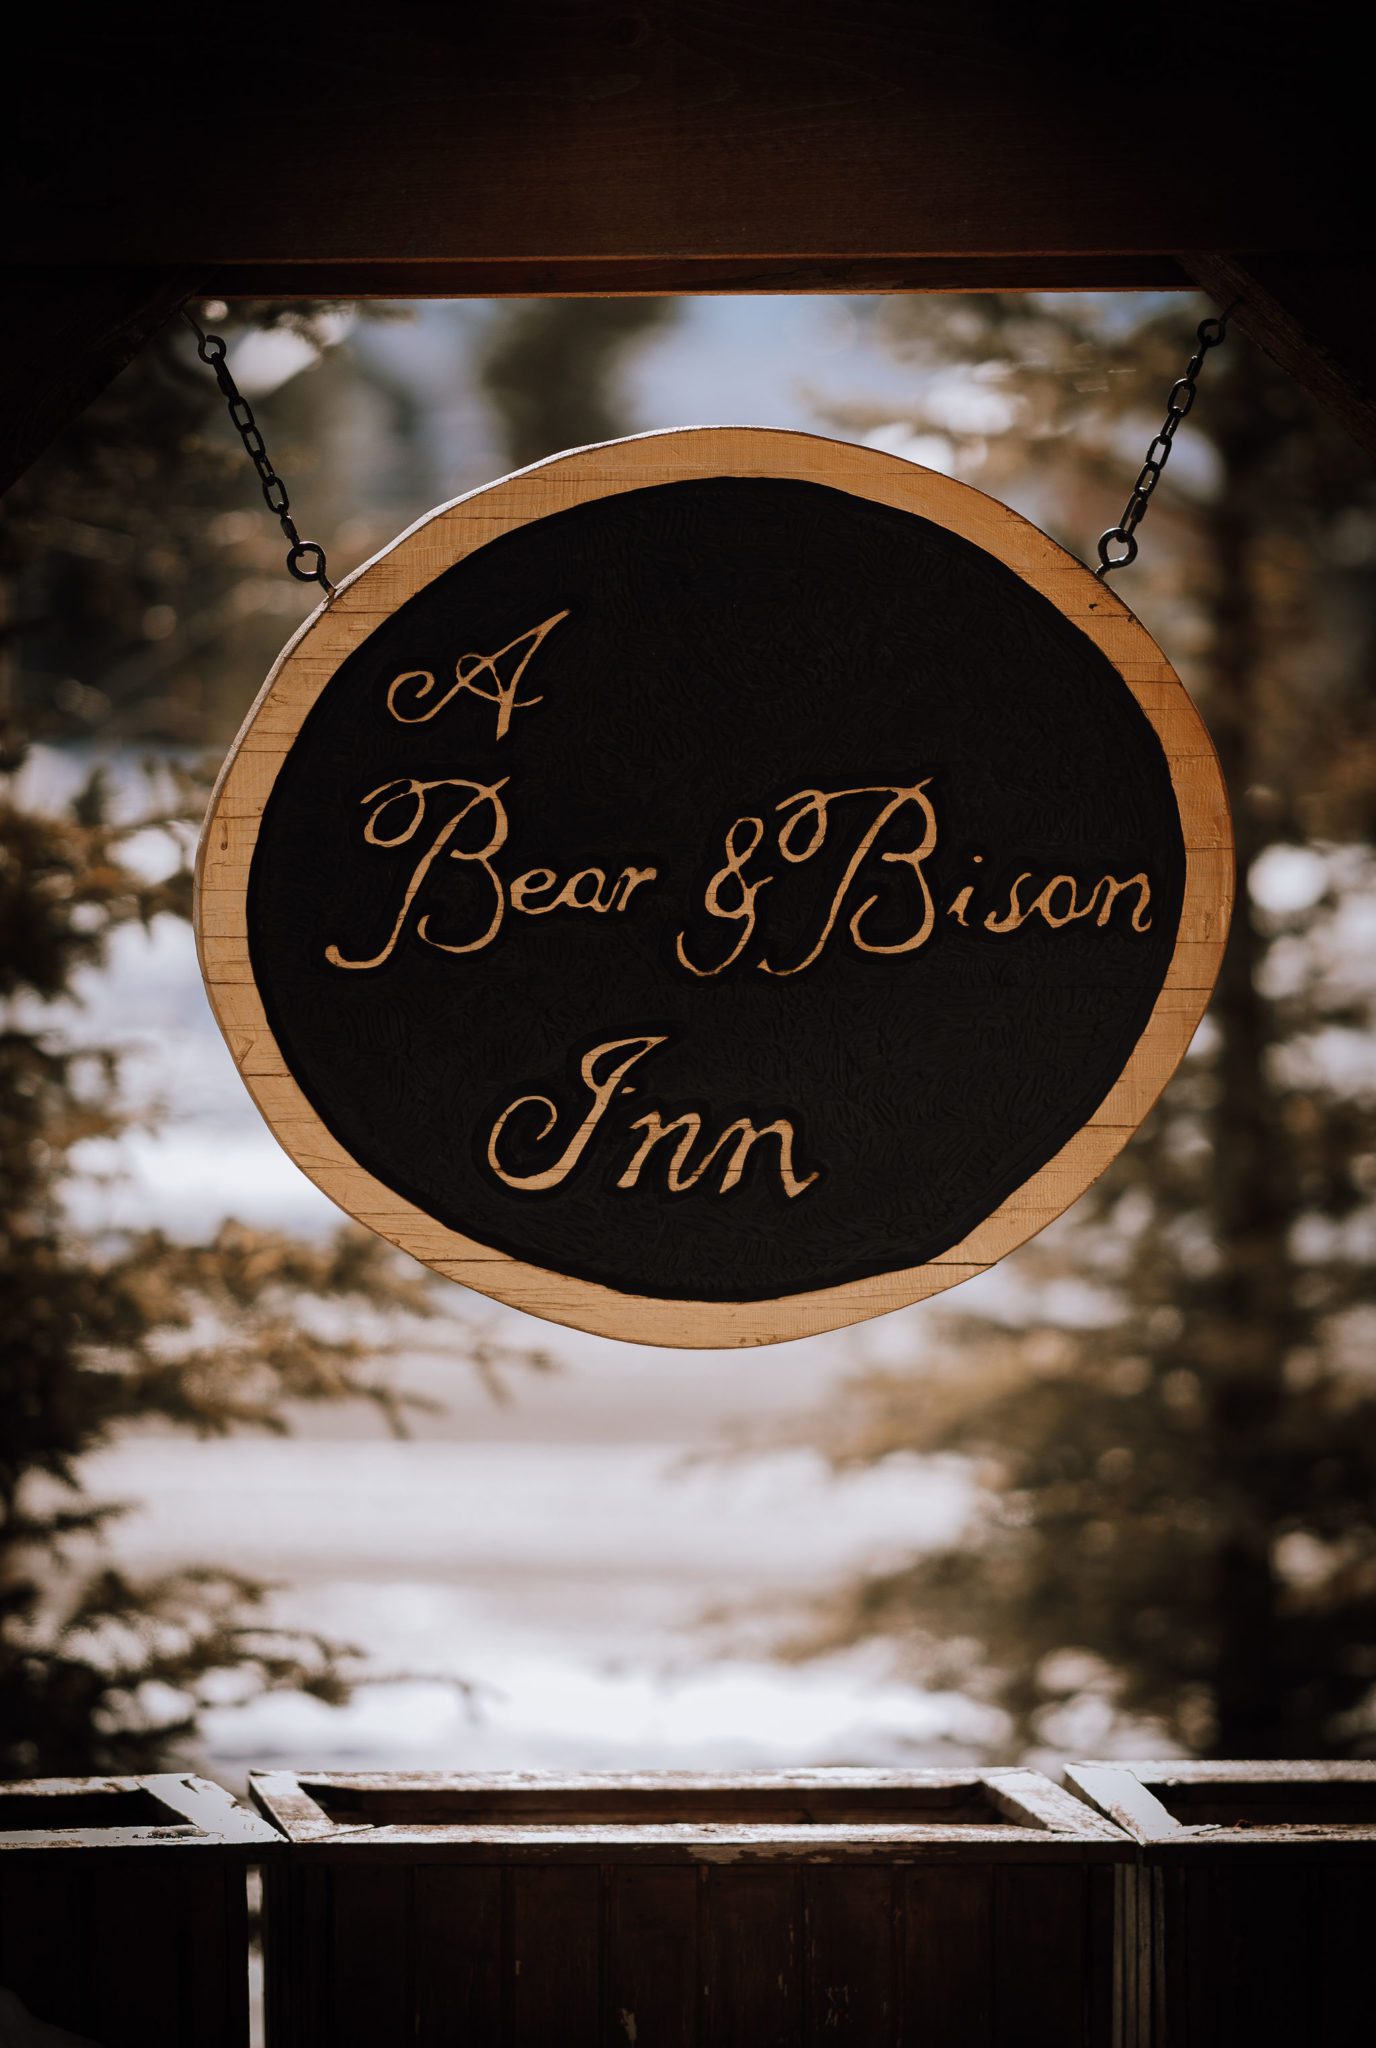 A Bear and Bison Inn